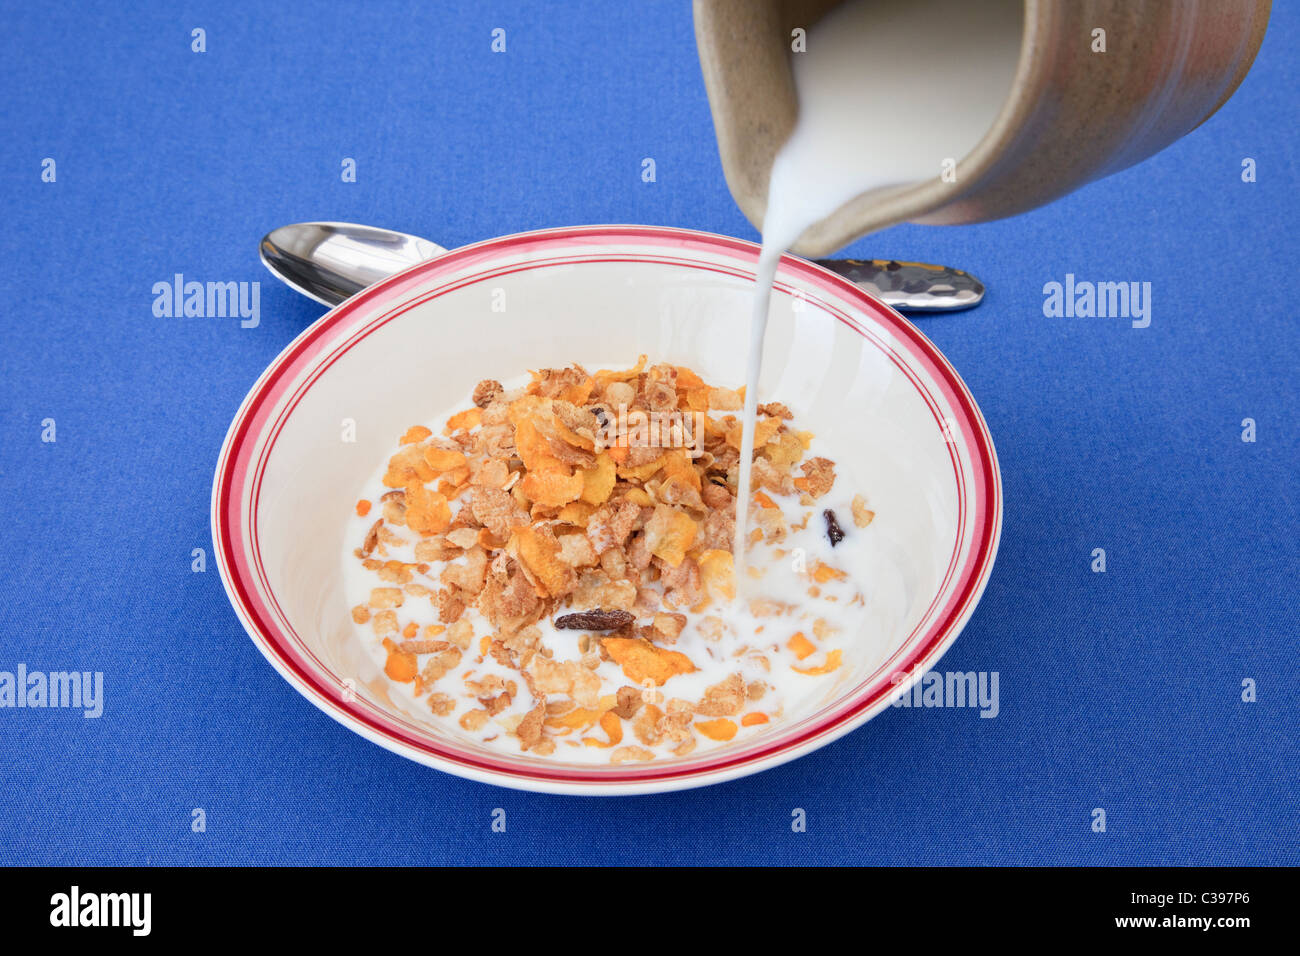 Pouring milk from a jug onto a bowl of breakfast cereal from above. England UK Stock Photo